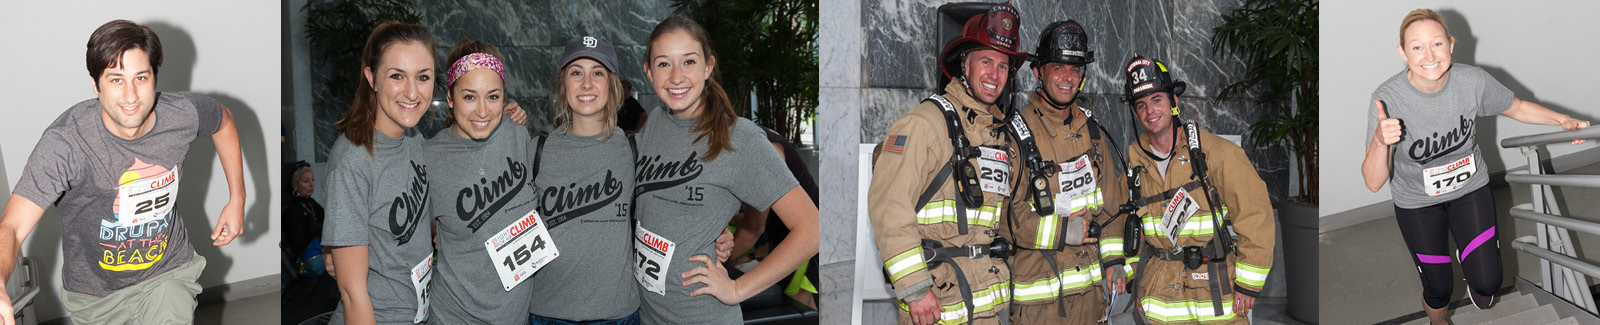 Fight For Air Climb - San Diego. Step Up to the Challenge!